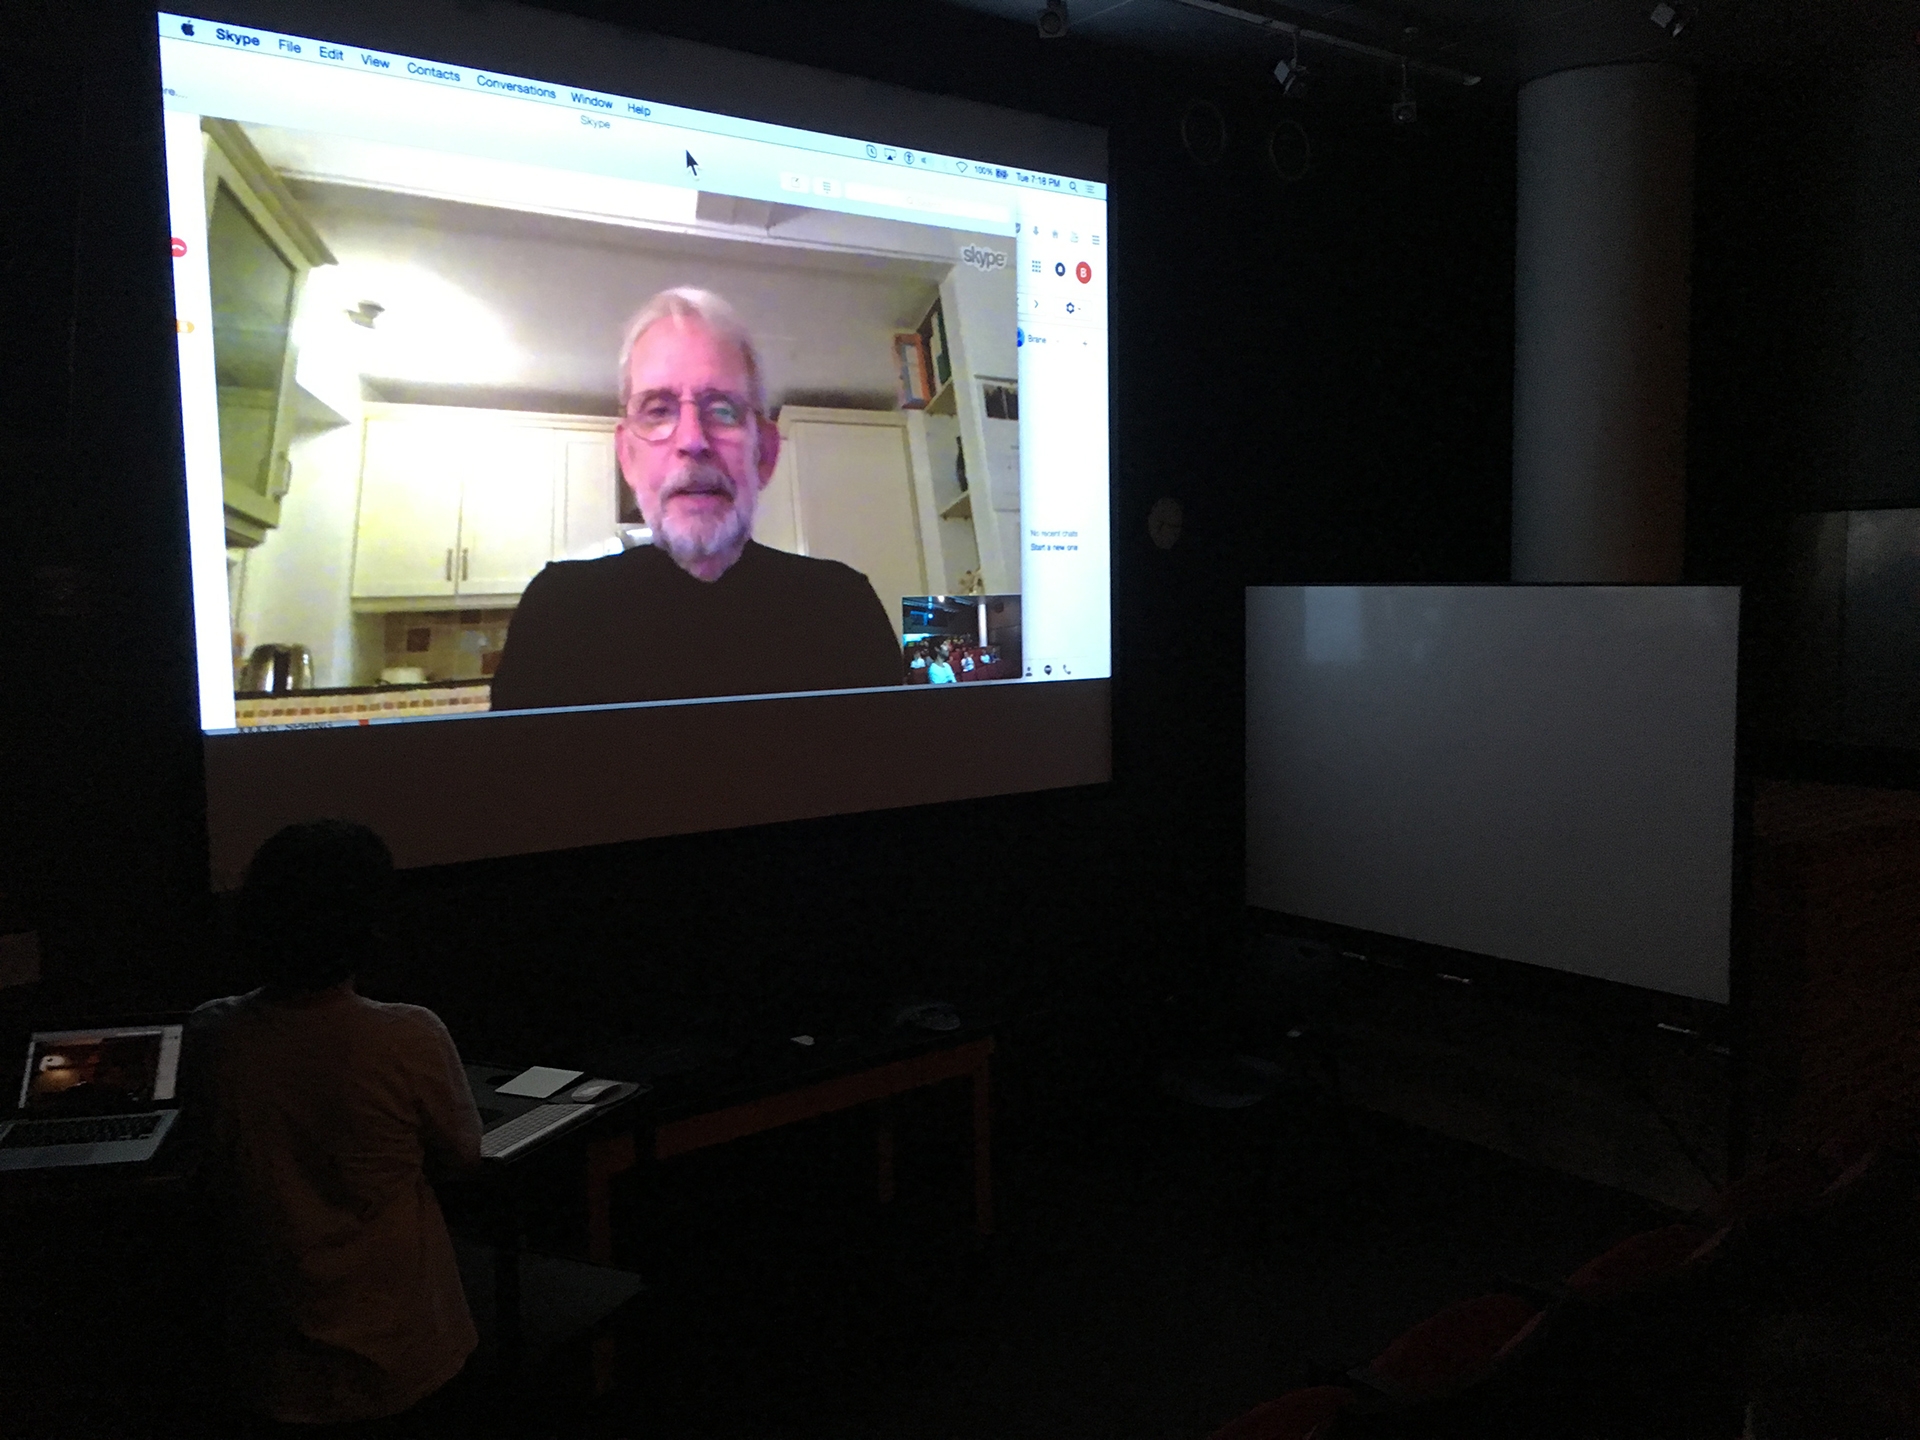 Walter Murch talks to students during class